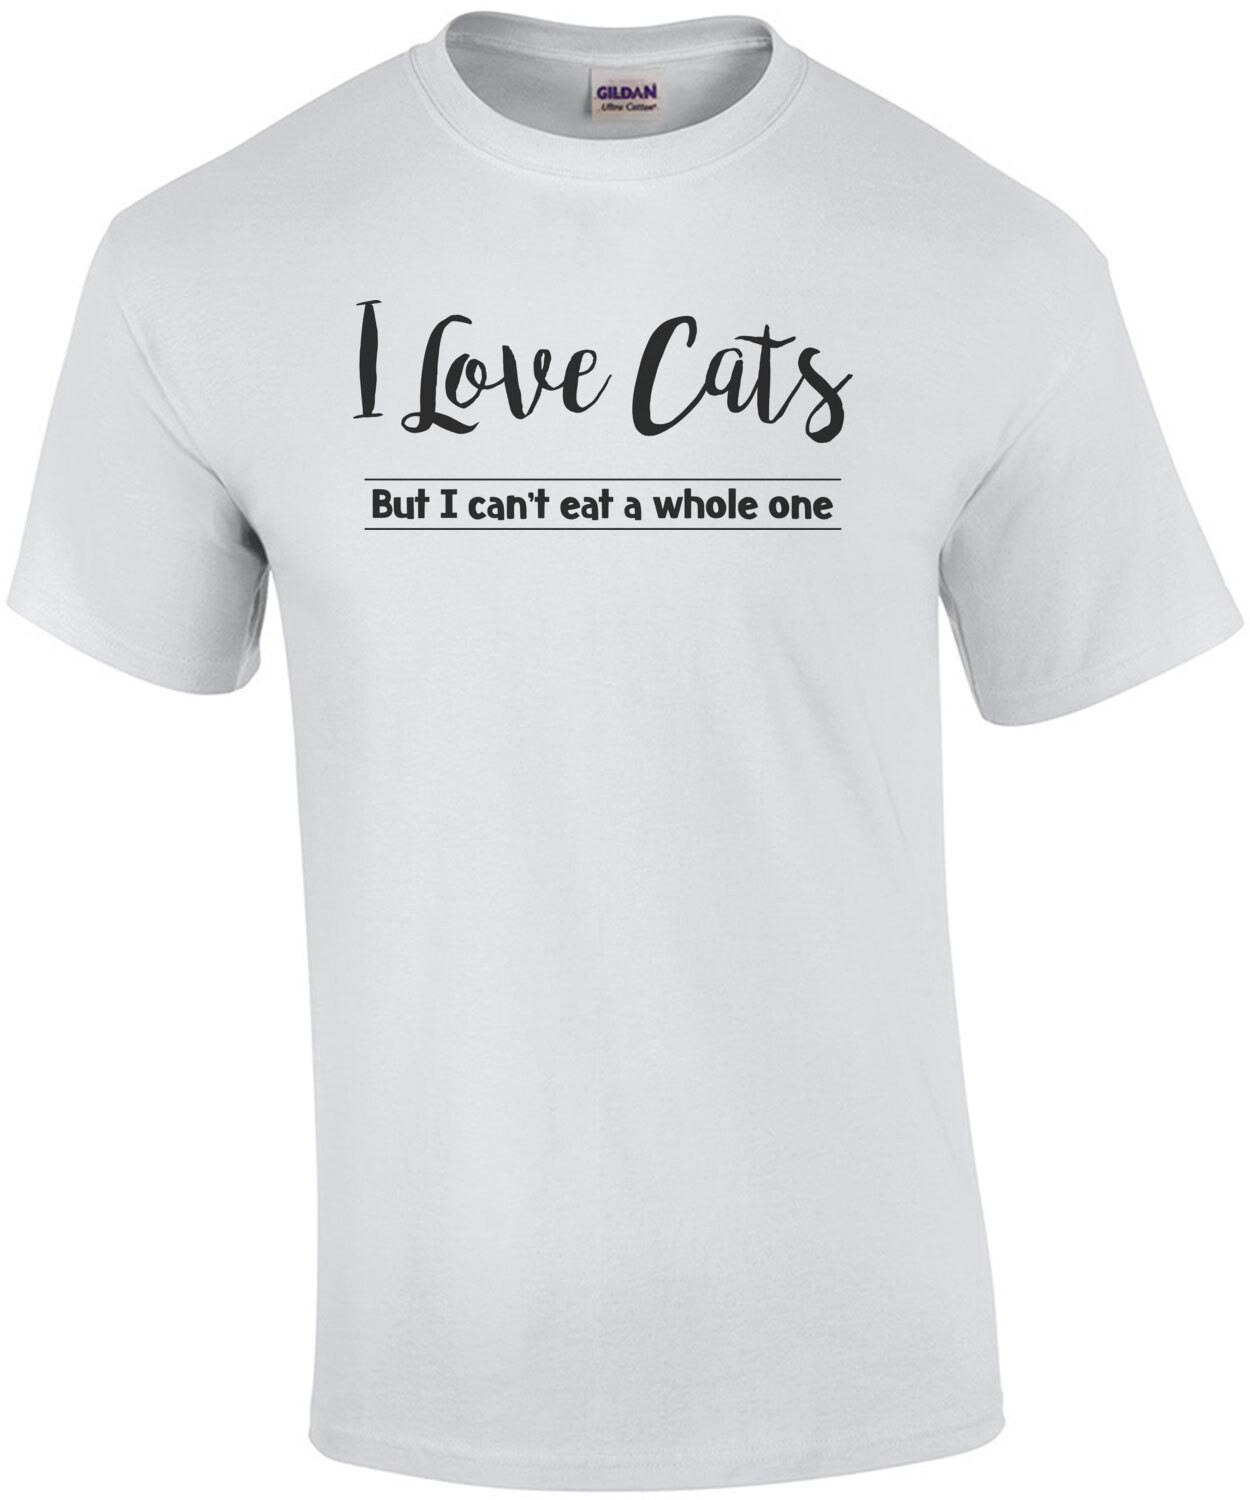 I Love Cats, But I Can't Eat A Whole One T-Shirt